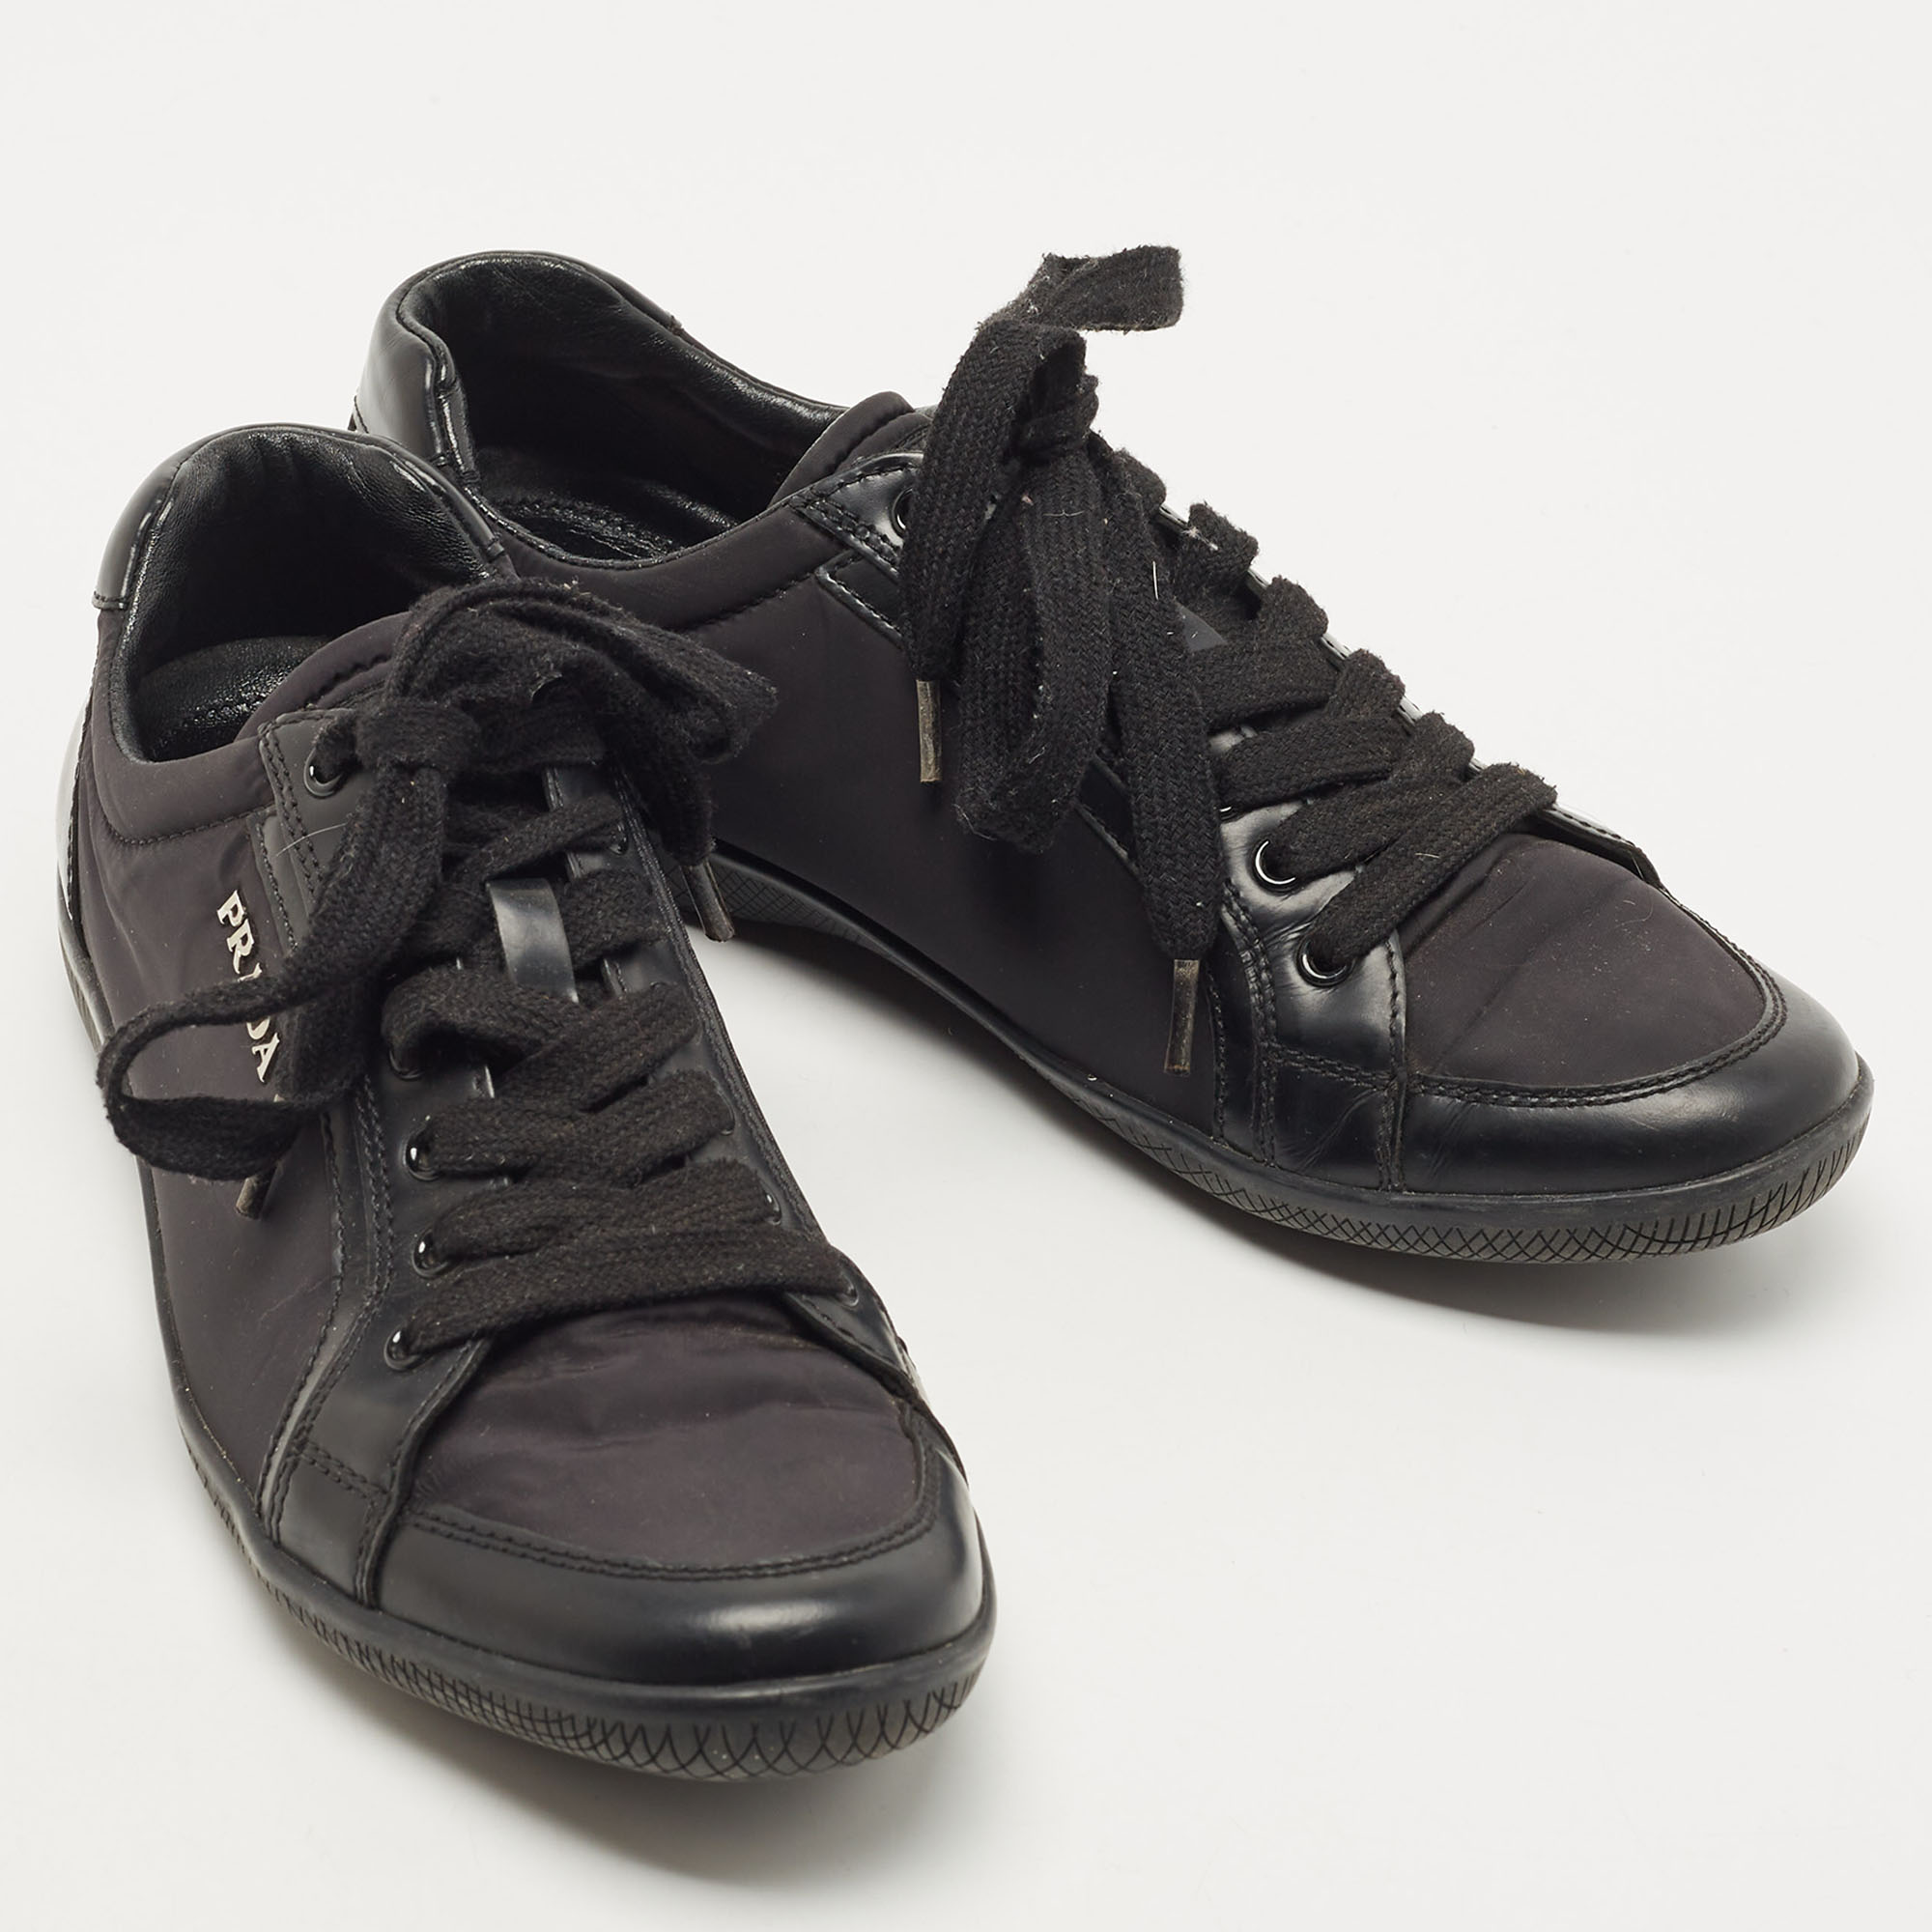 Prada Sport Black Nylon Fabric And Leather Low Top Sneakers Size 37.5